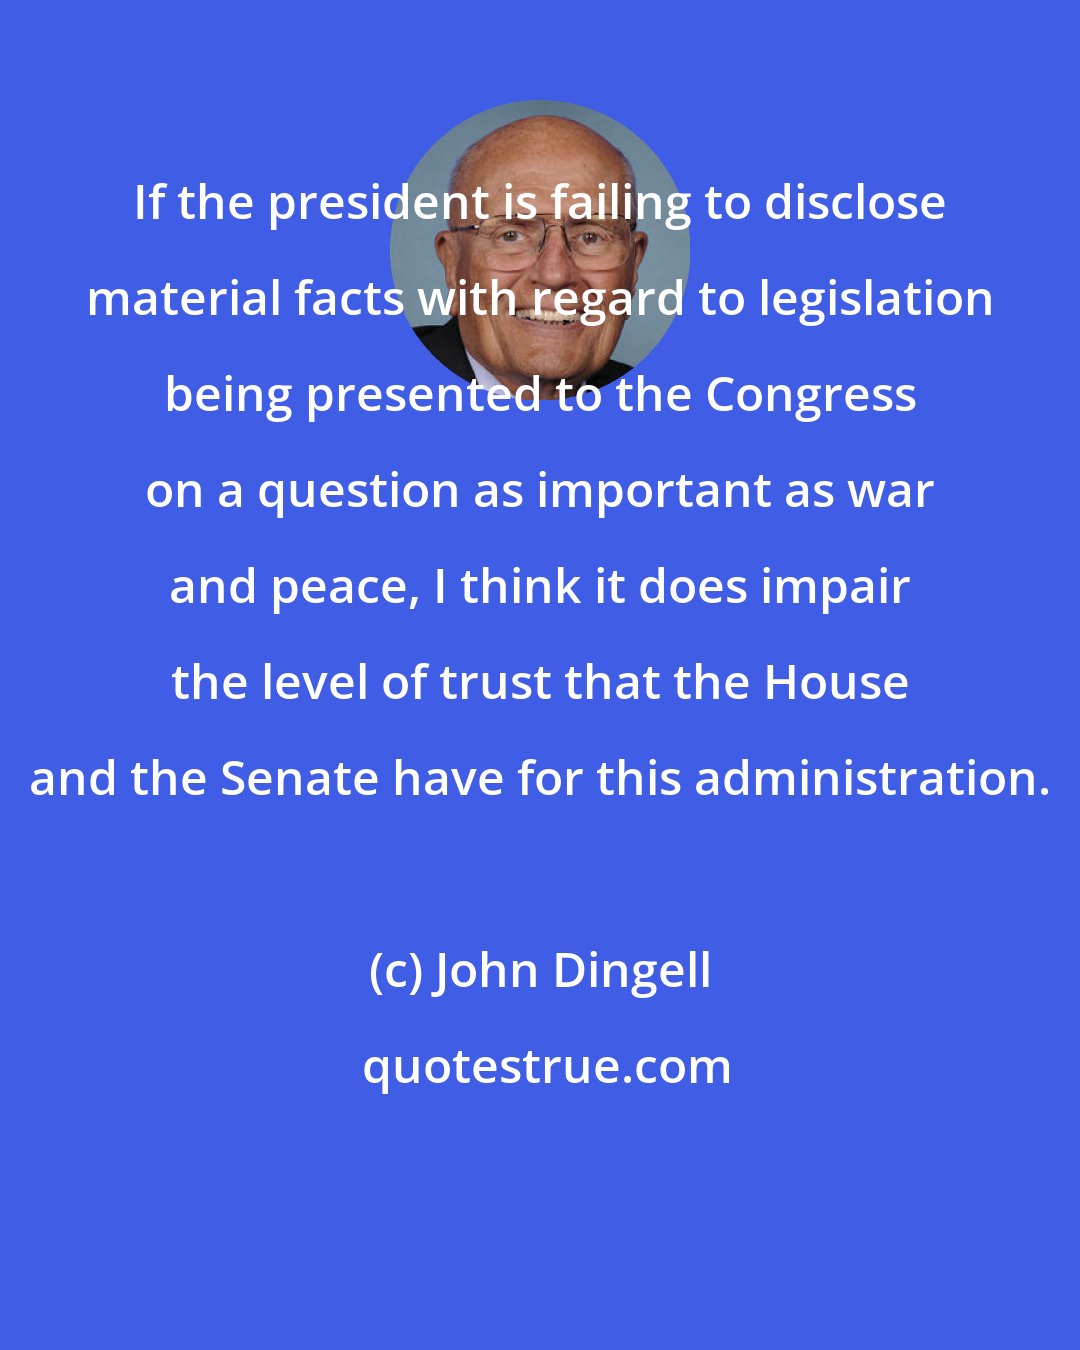 John Dingell: If the president is failing to disclose material facts with regard to legislation being presented to the Congress on a question as important as war and peace, I think it does impair the level of trust that the House and the Senate have for this administration.